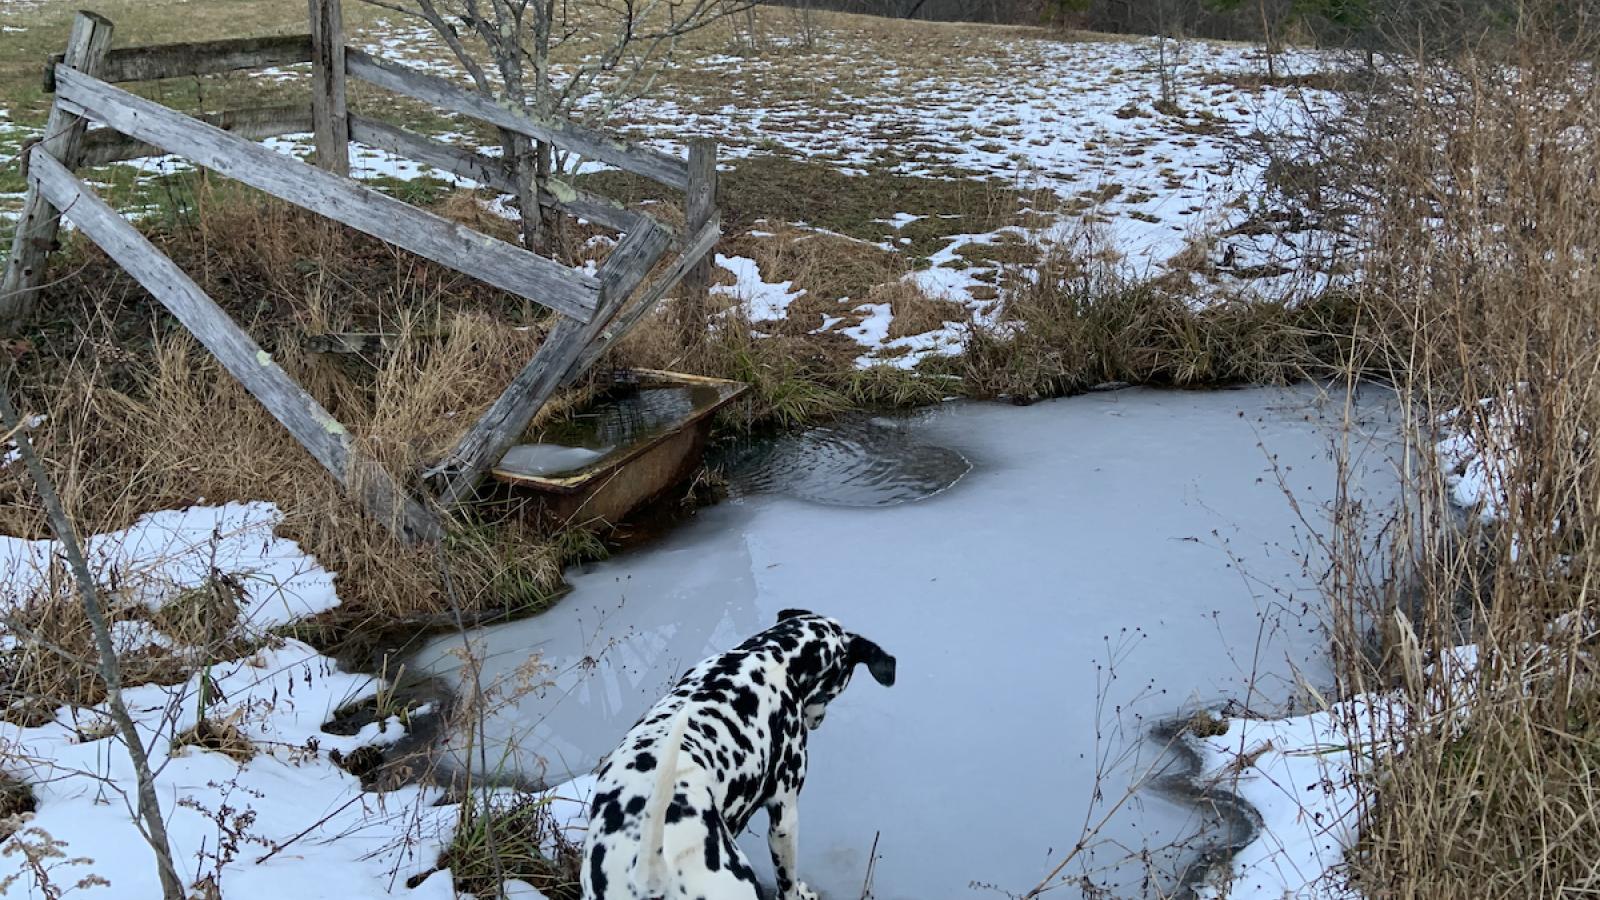 Image of Valerie Scott's dog, a dalmatian, looking into a murky, iced over pond on her property in Hocking County. There is an old, broken down wooden fence, a rusty trough filled with ice, and snow on the field and trees throughout the image. 